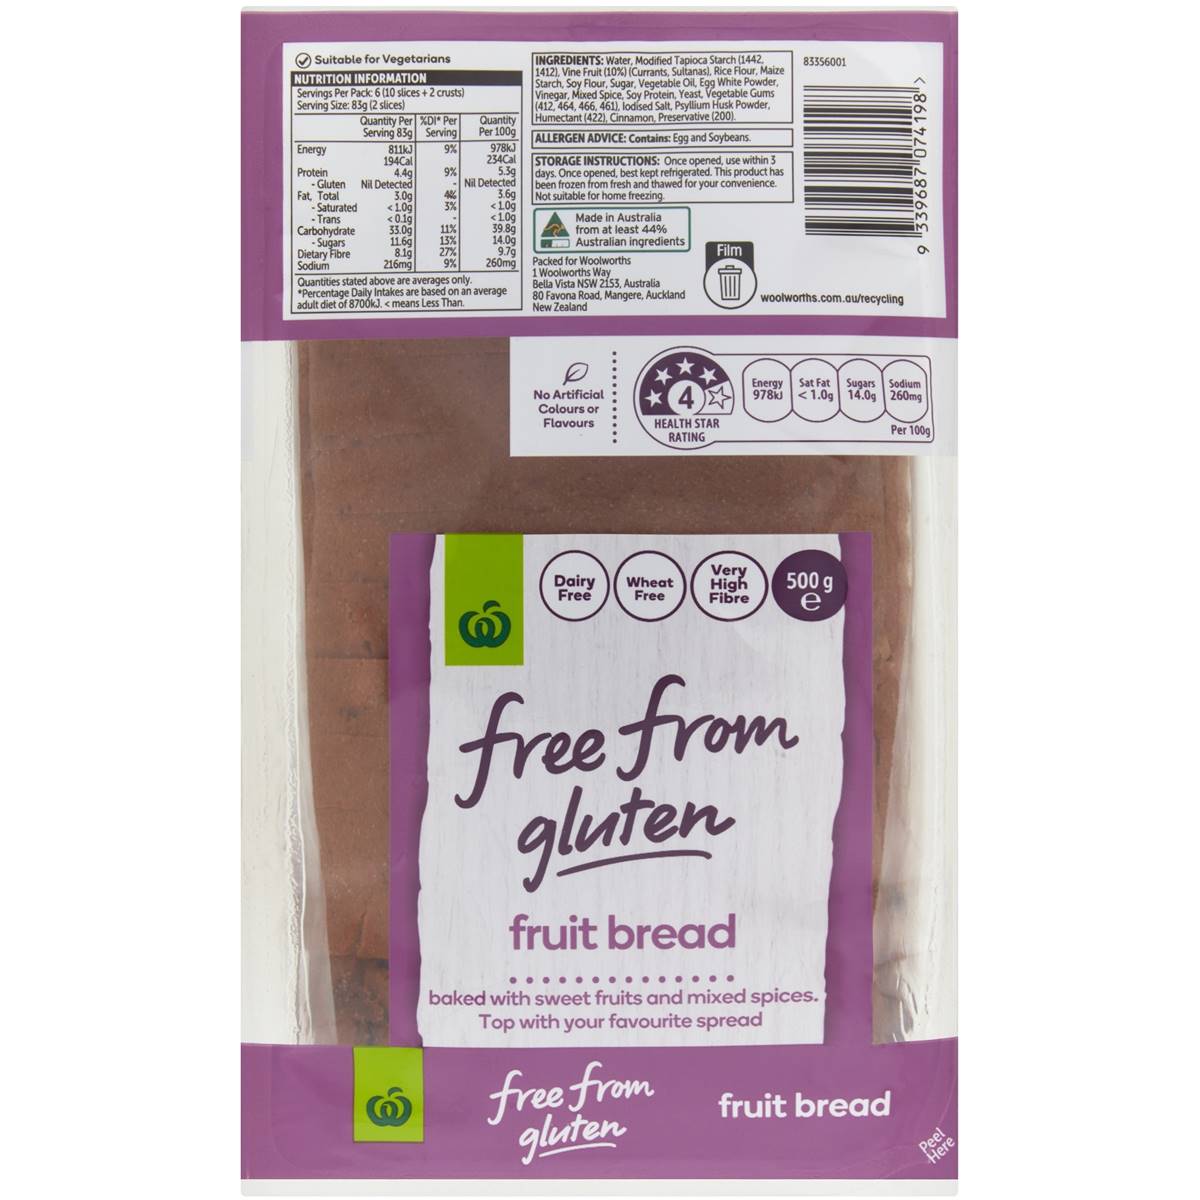 Calories in Woolworths Free From Gluten Fruit Bread